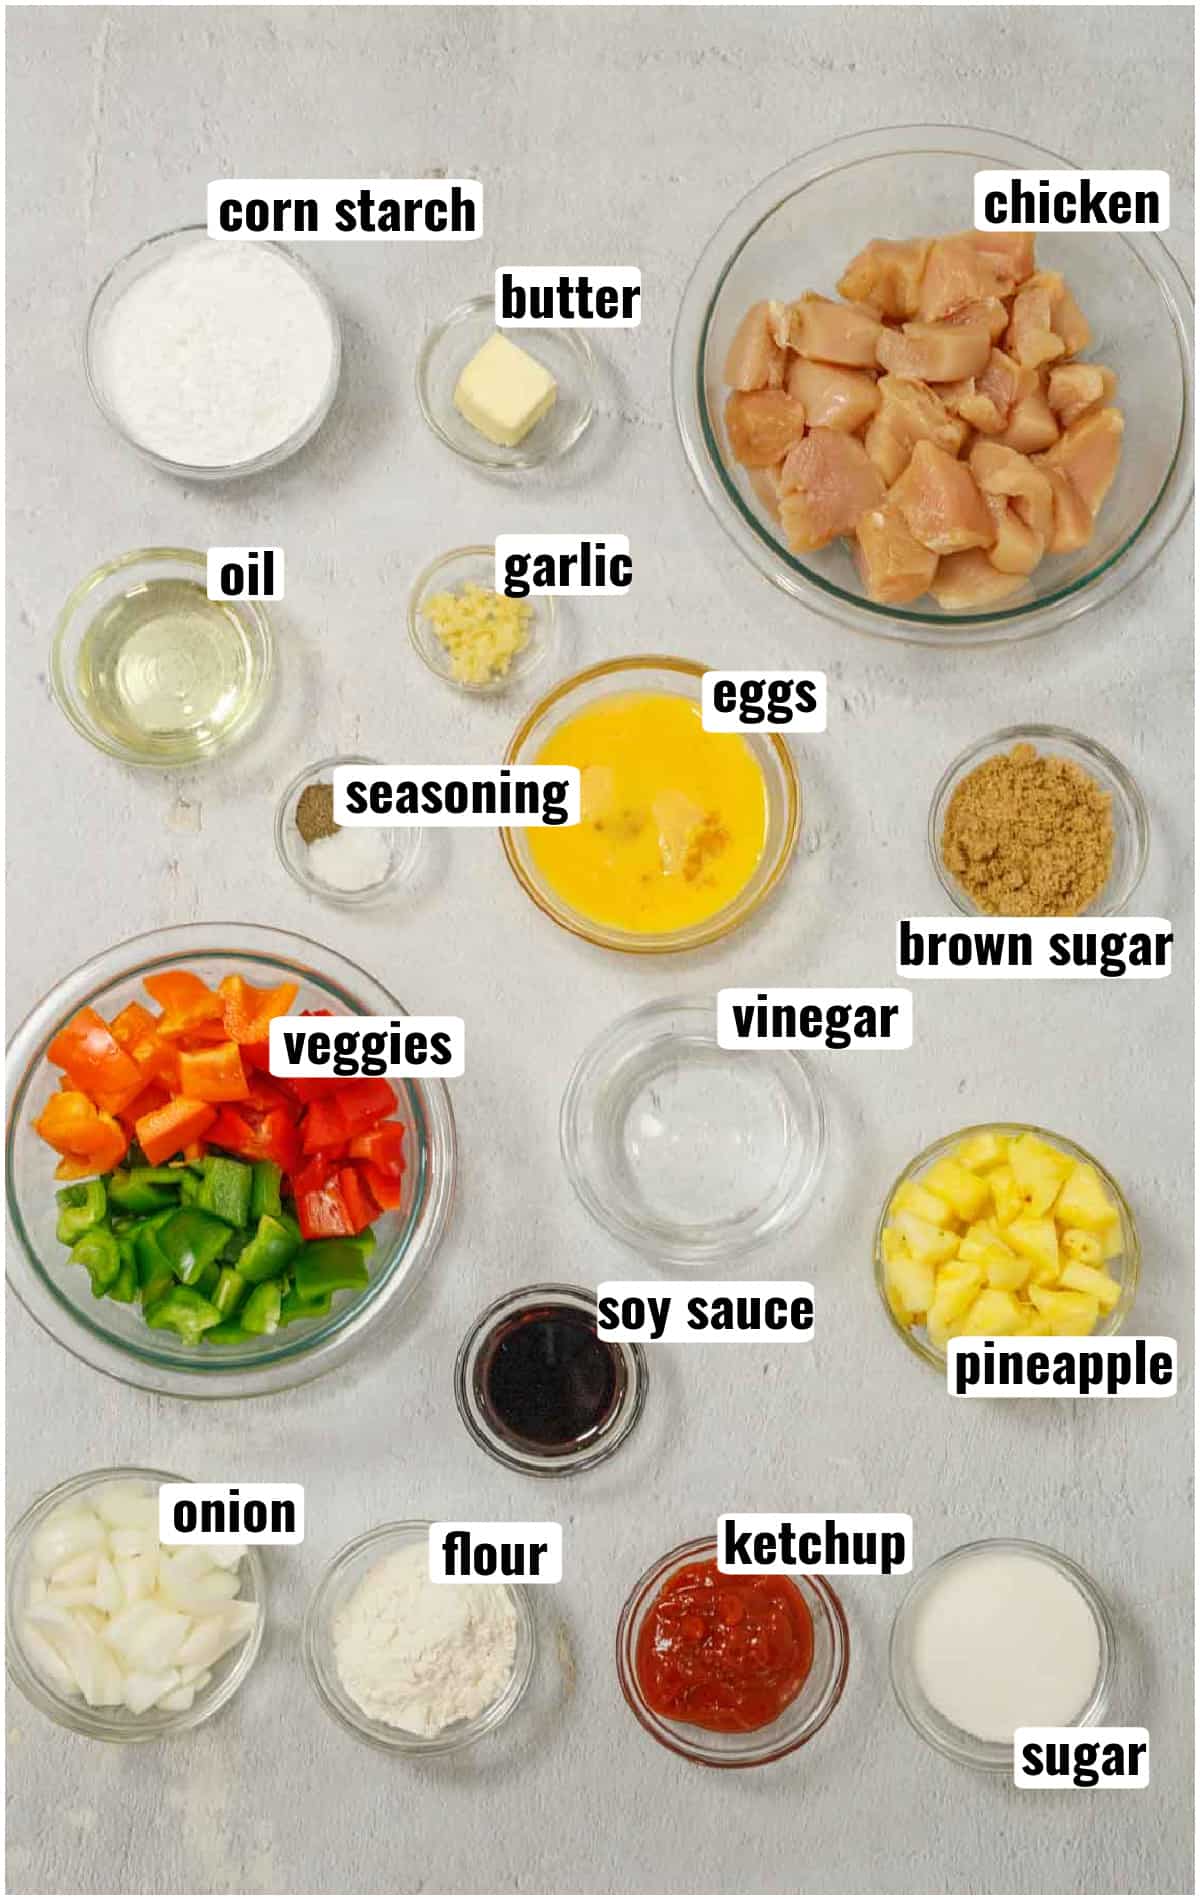 All ingredients needed to make sweet and sour chicken ready to be made.